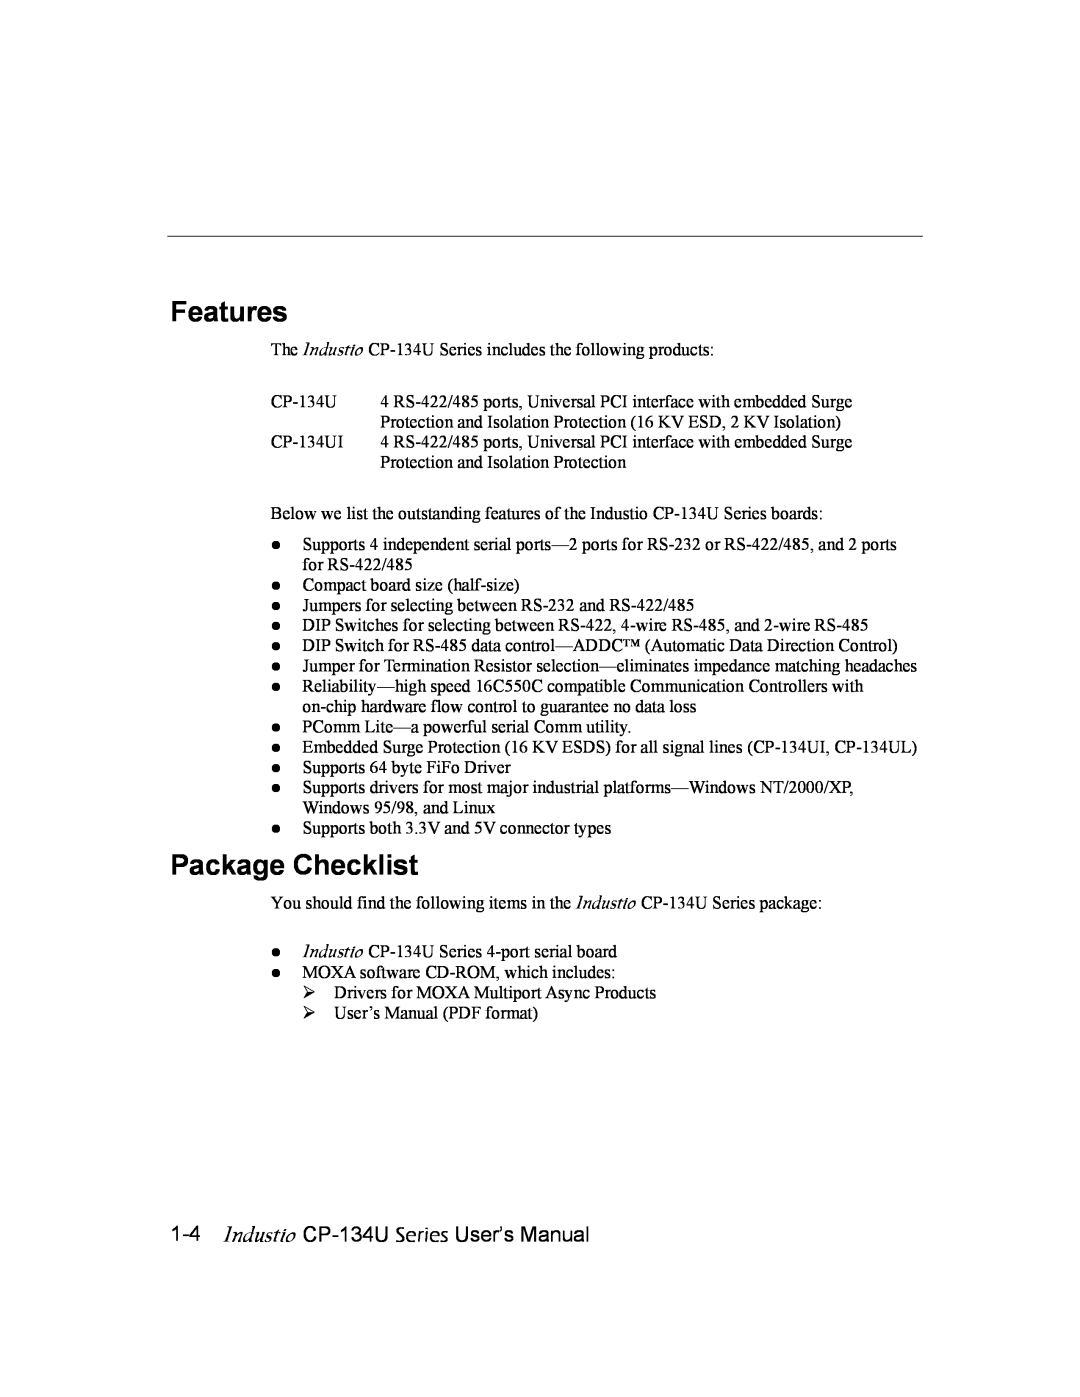 Moxa Technologies user manual Features, Package Checklist, Industio CP-134U Series User’s Manual 